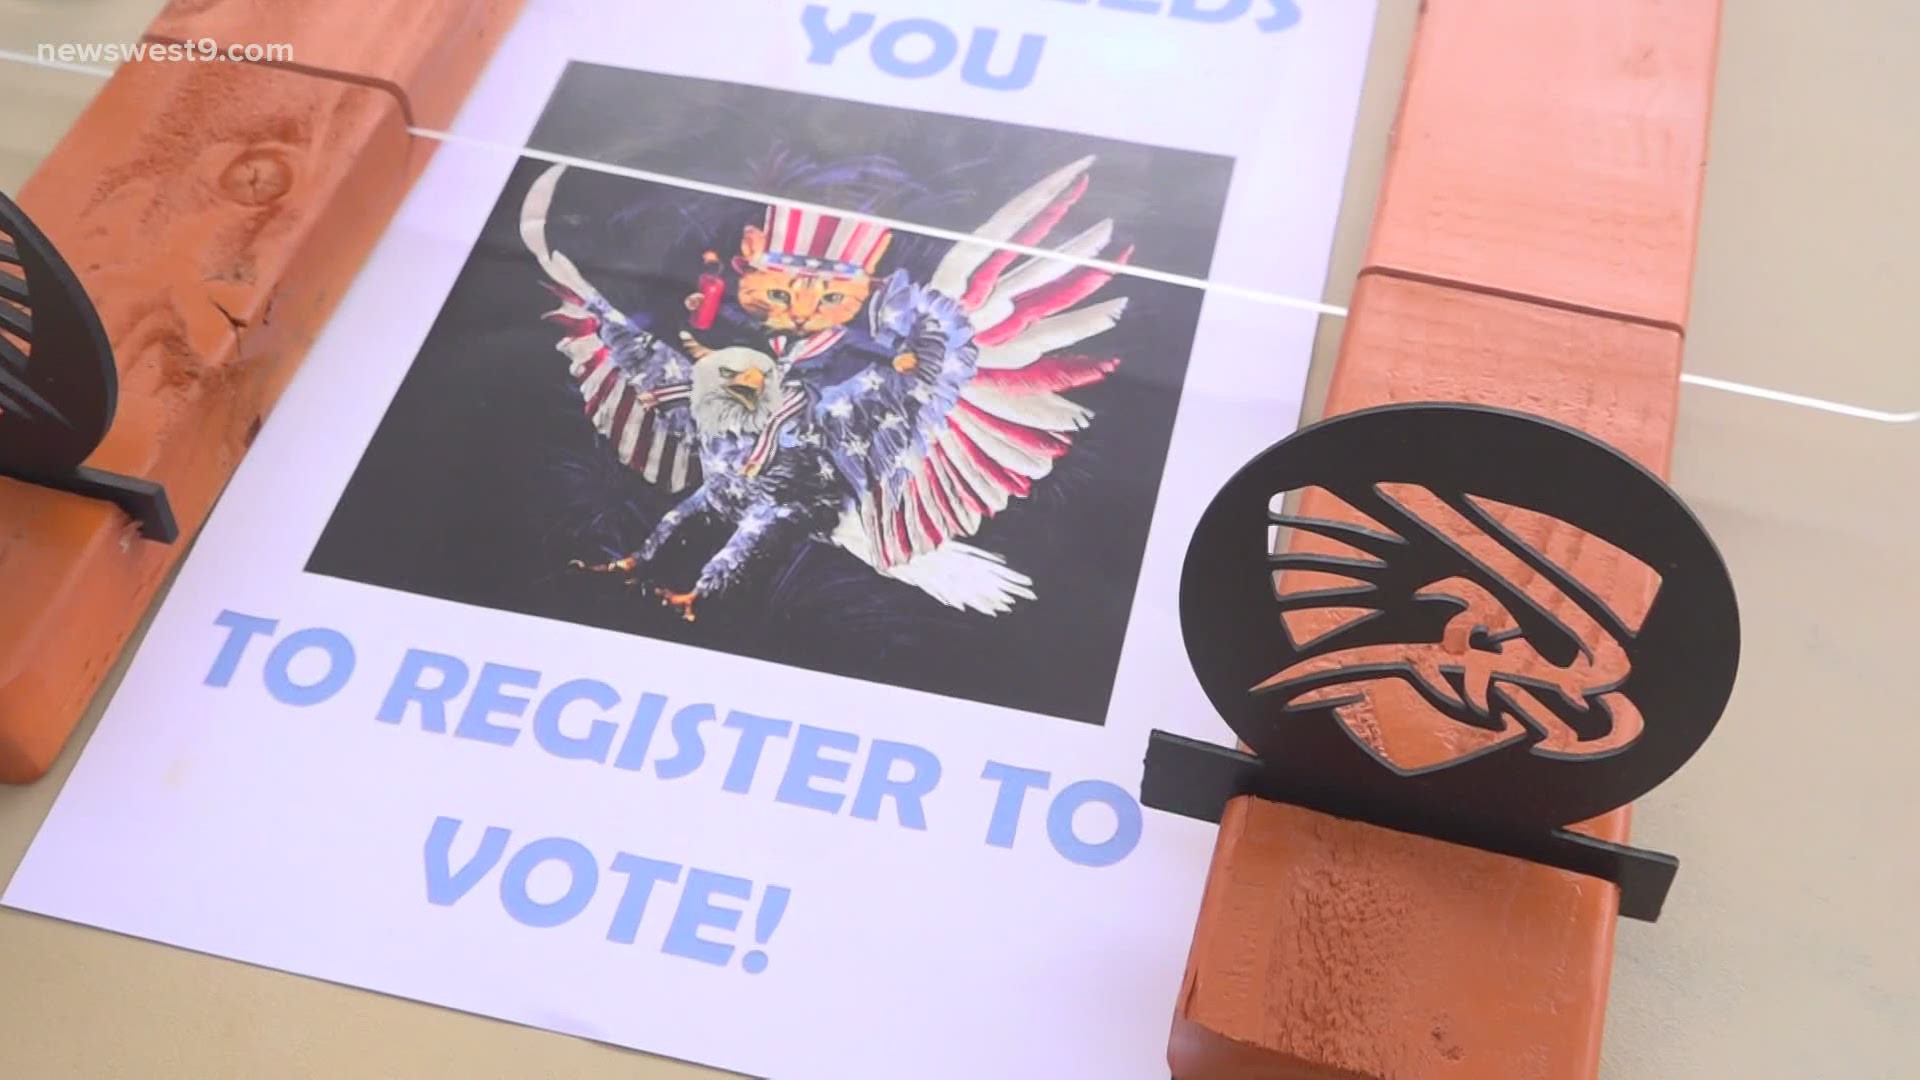 What started as a goal to ensure the entire UTPB Men's Hoops program is registered to vote turned into a community event encouraging voter registration.